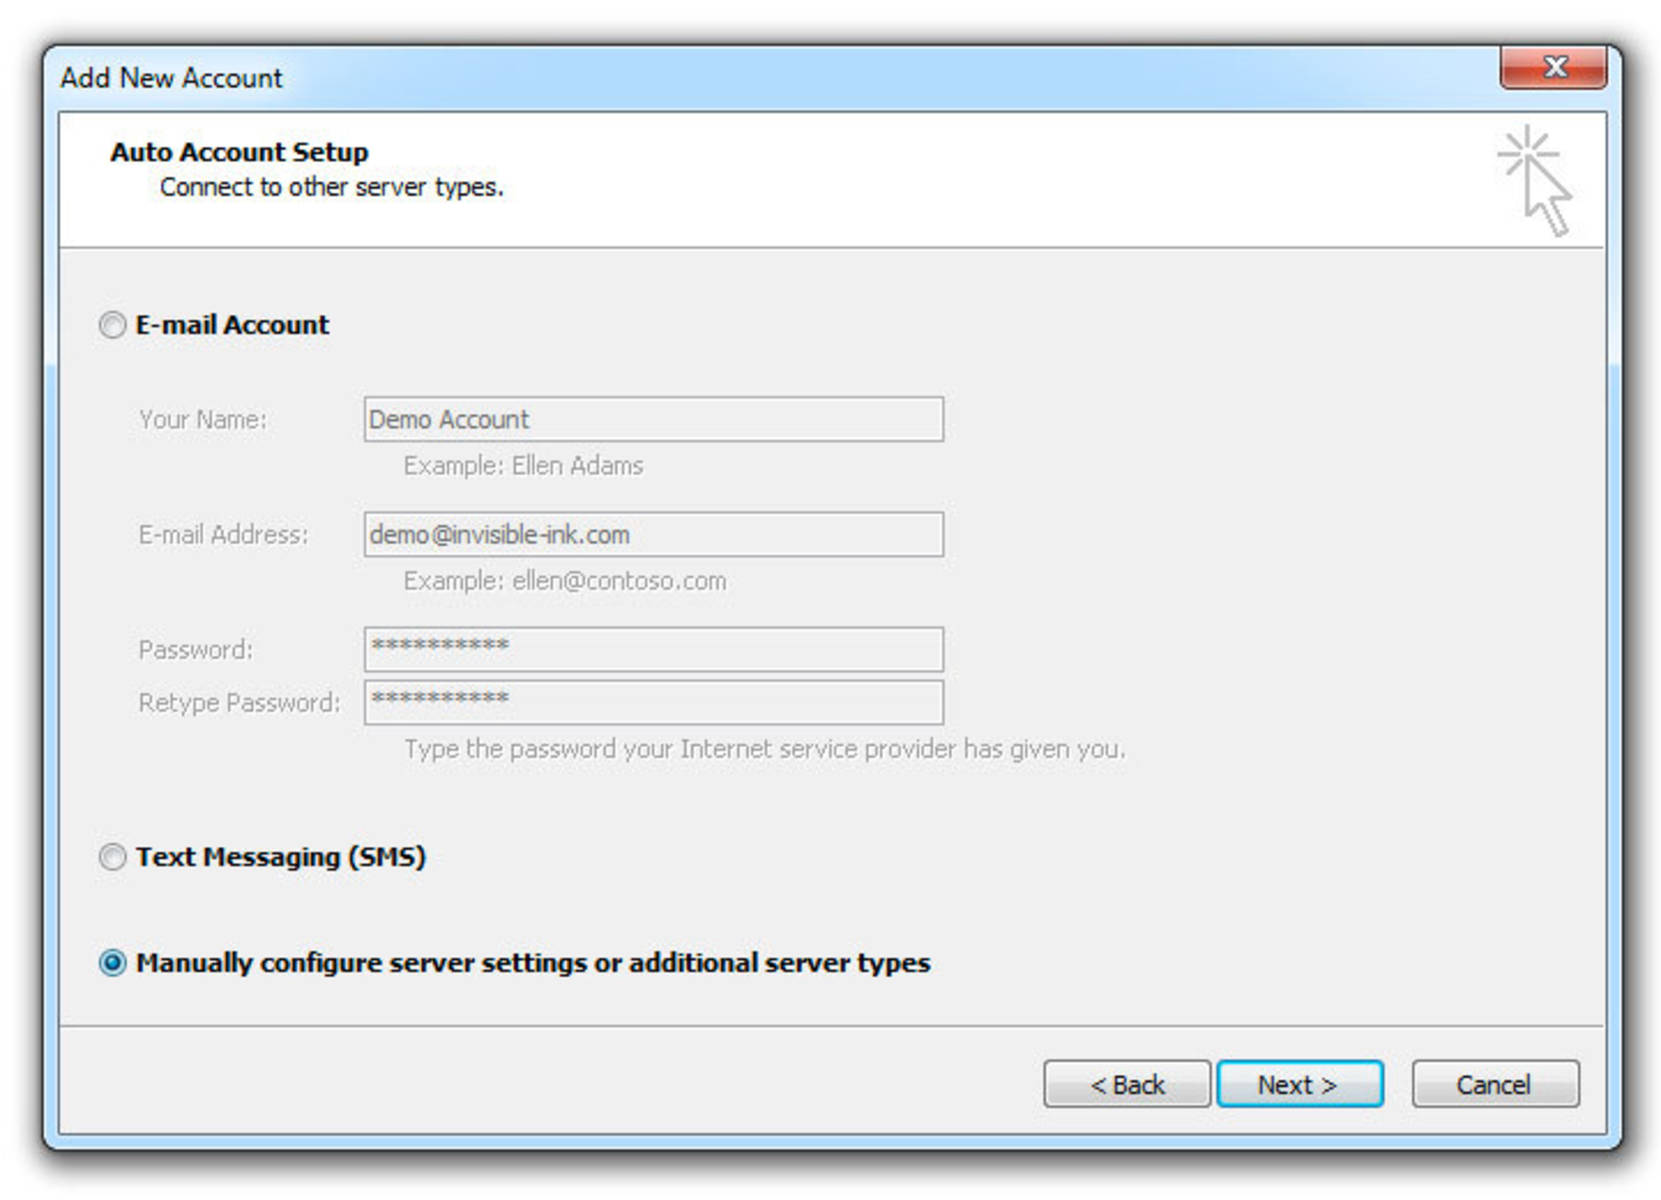 Step 2 » Select "Manually configure server settings or additional server types". Click Next.